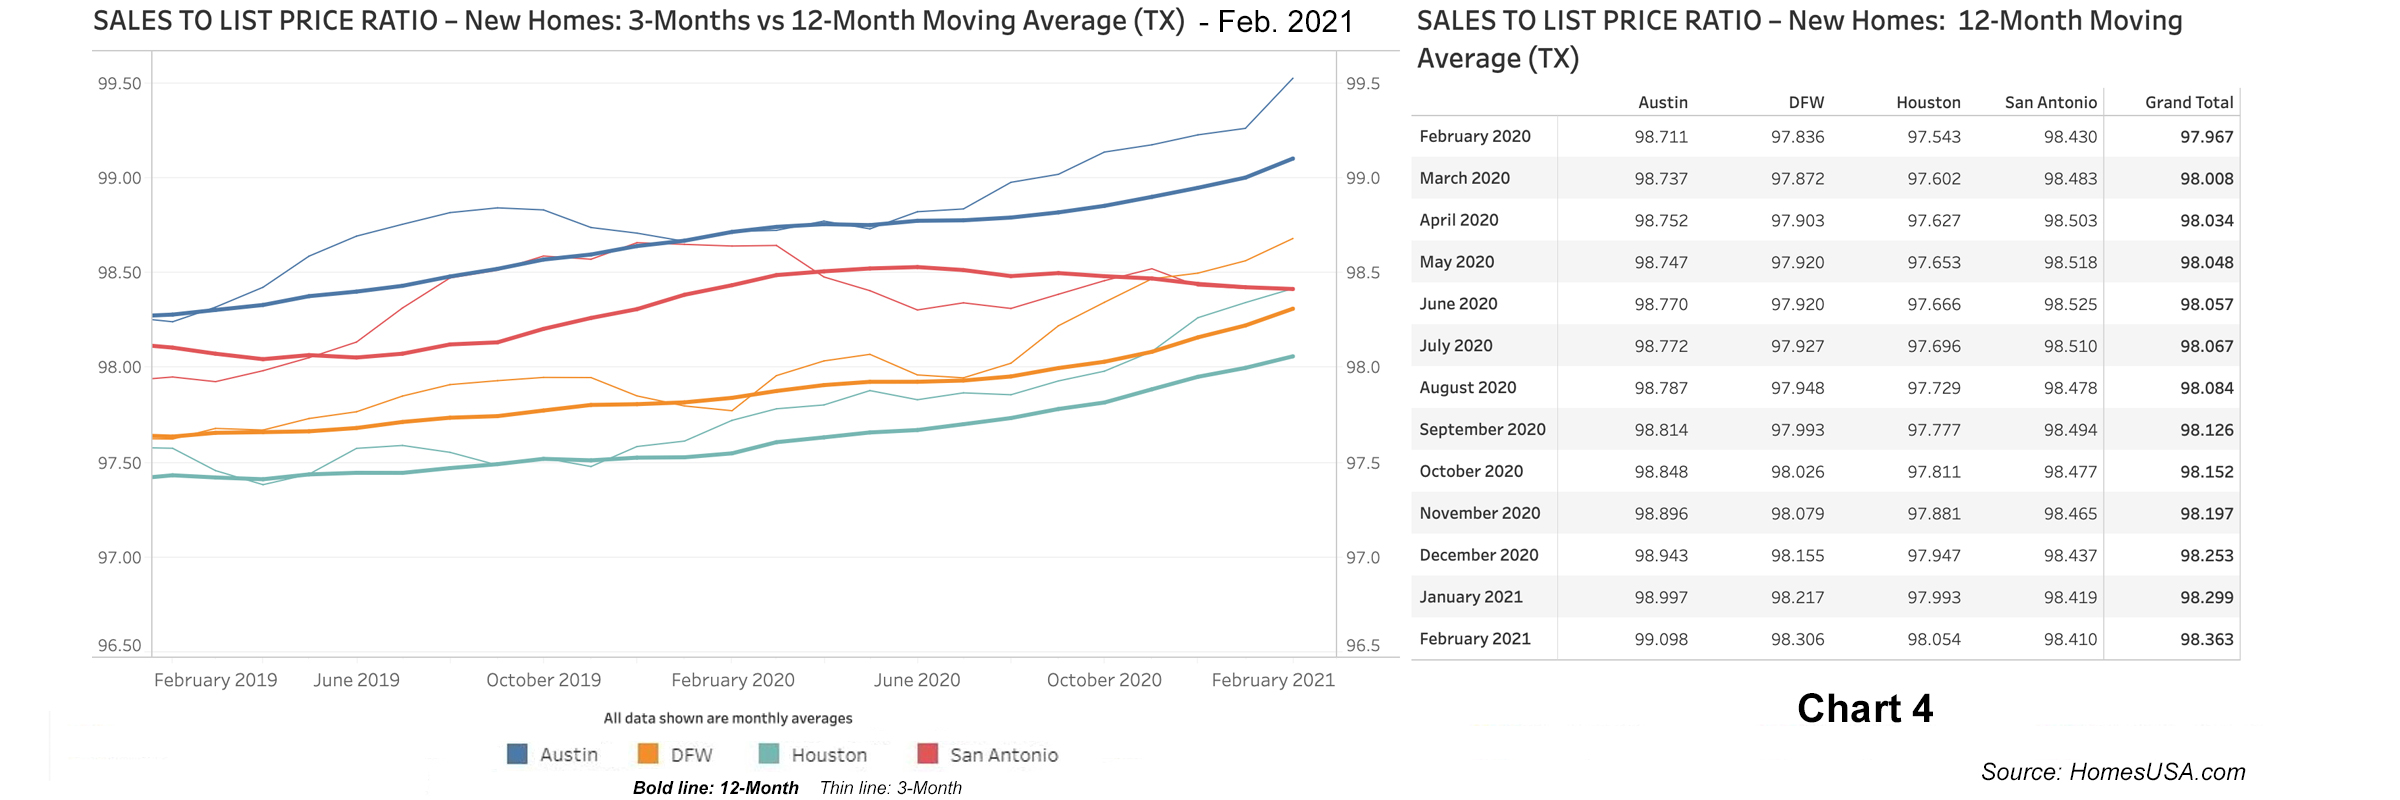 Chart 4: Sales-to-List-Price Ratio Data for Texas New Homes - February 2021